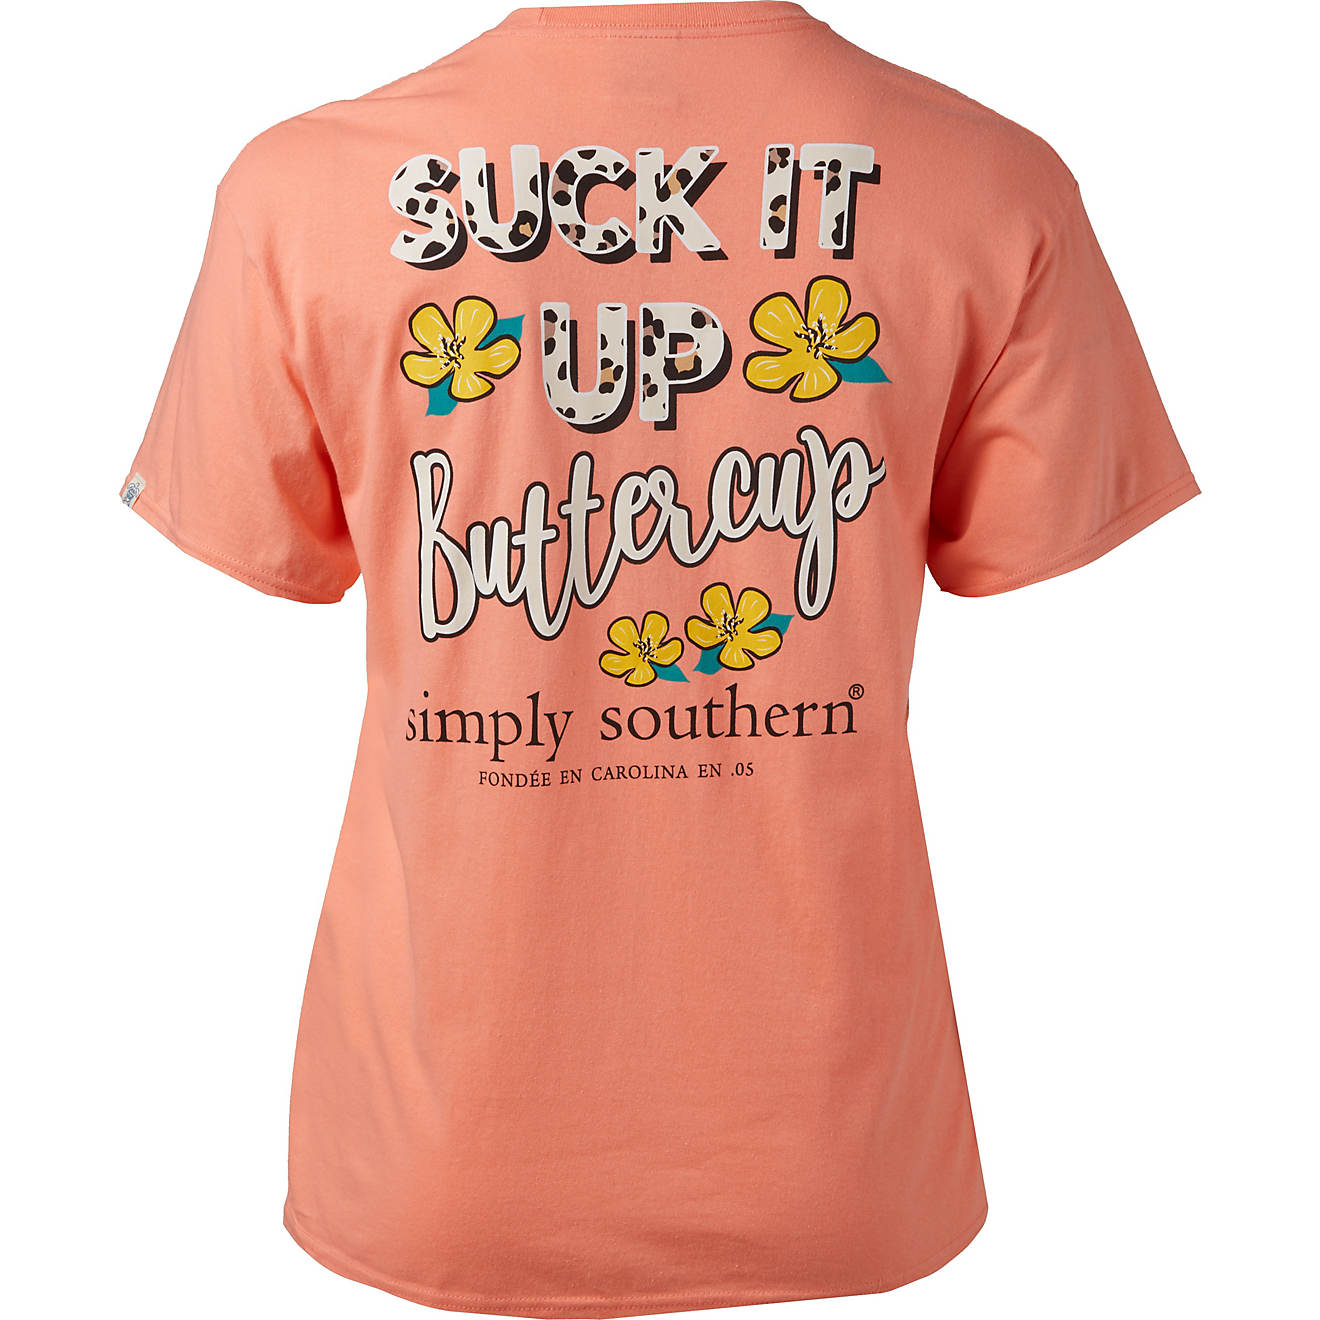 Simply Southern Women's Buttercup T-shirt                                                                                        - view number 1